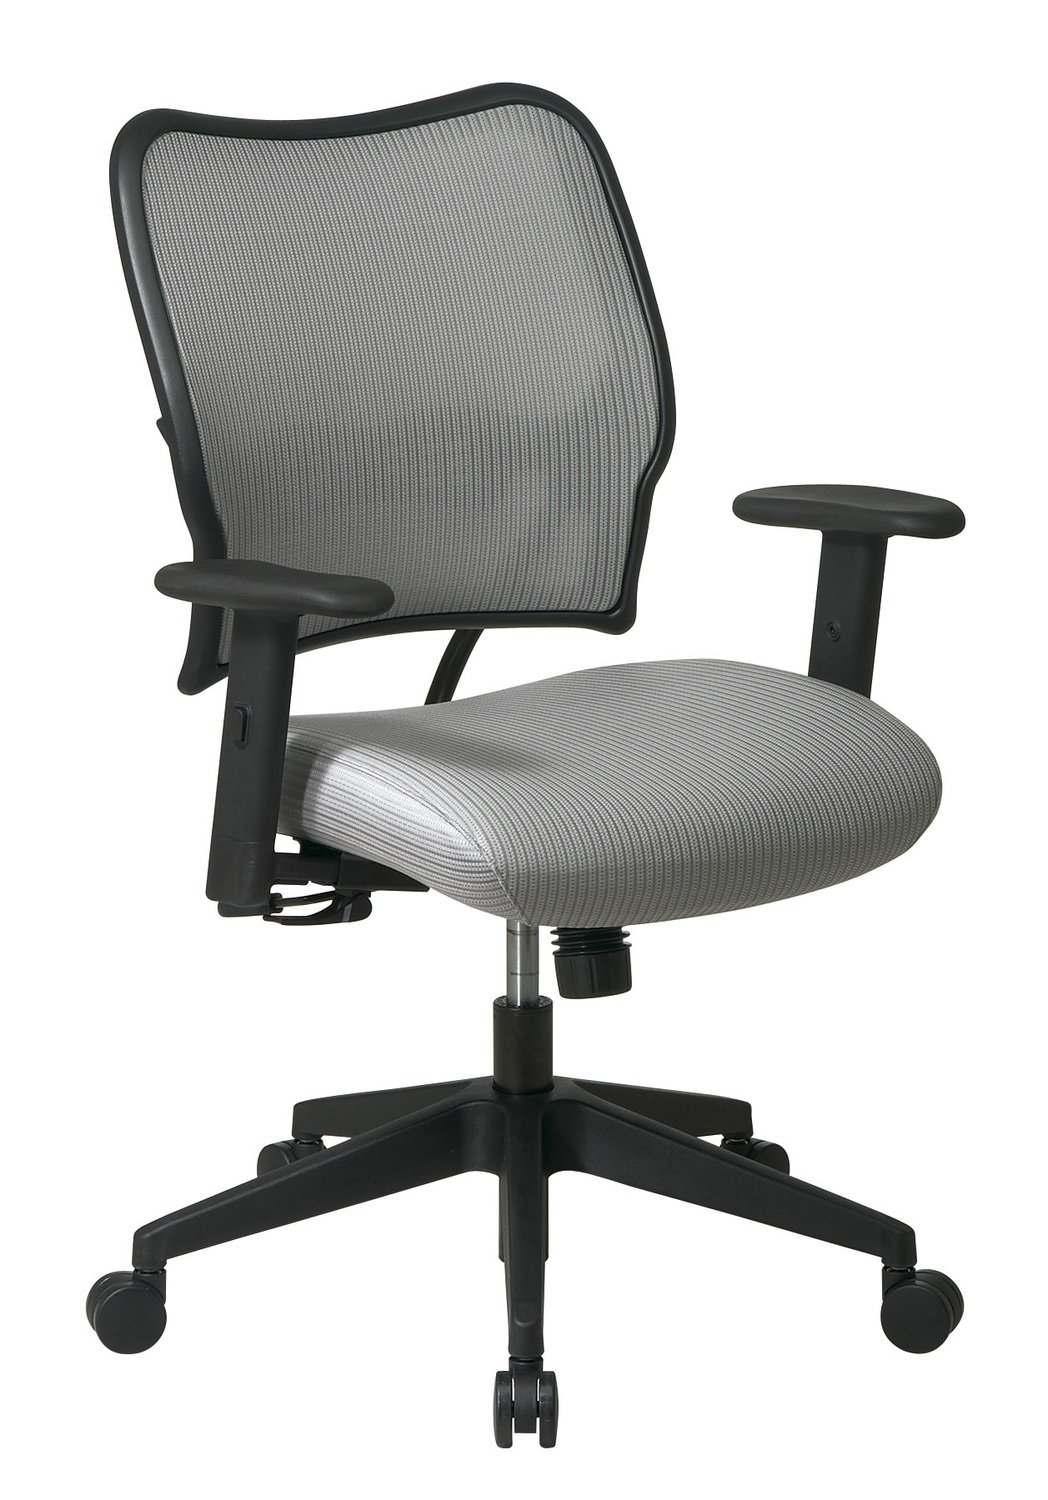 DELUXE CHAIR WITH SHADOW VERAFLEX BACK AND VERAFLEX FABRIC SEAT